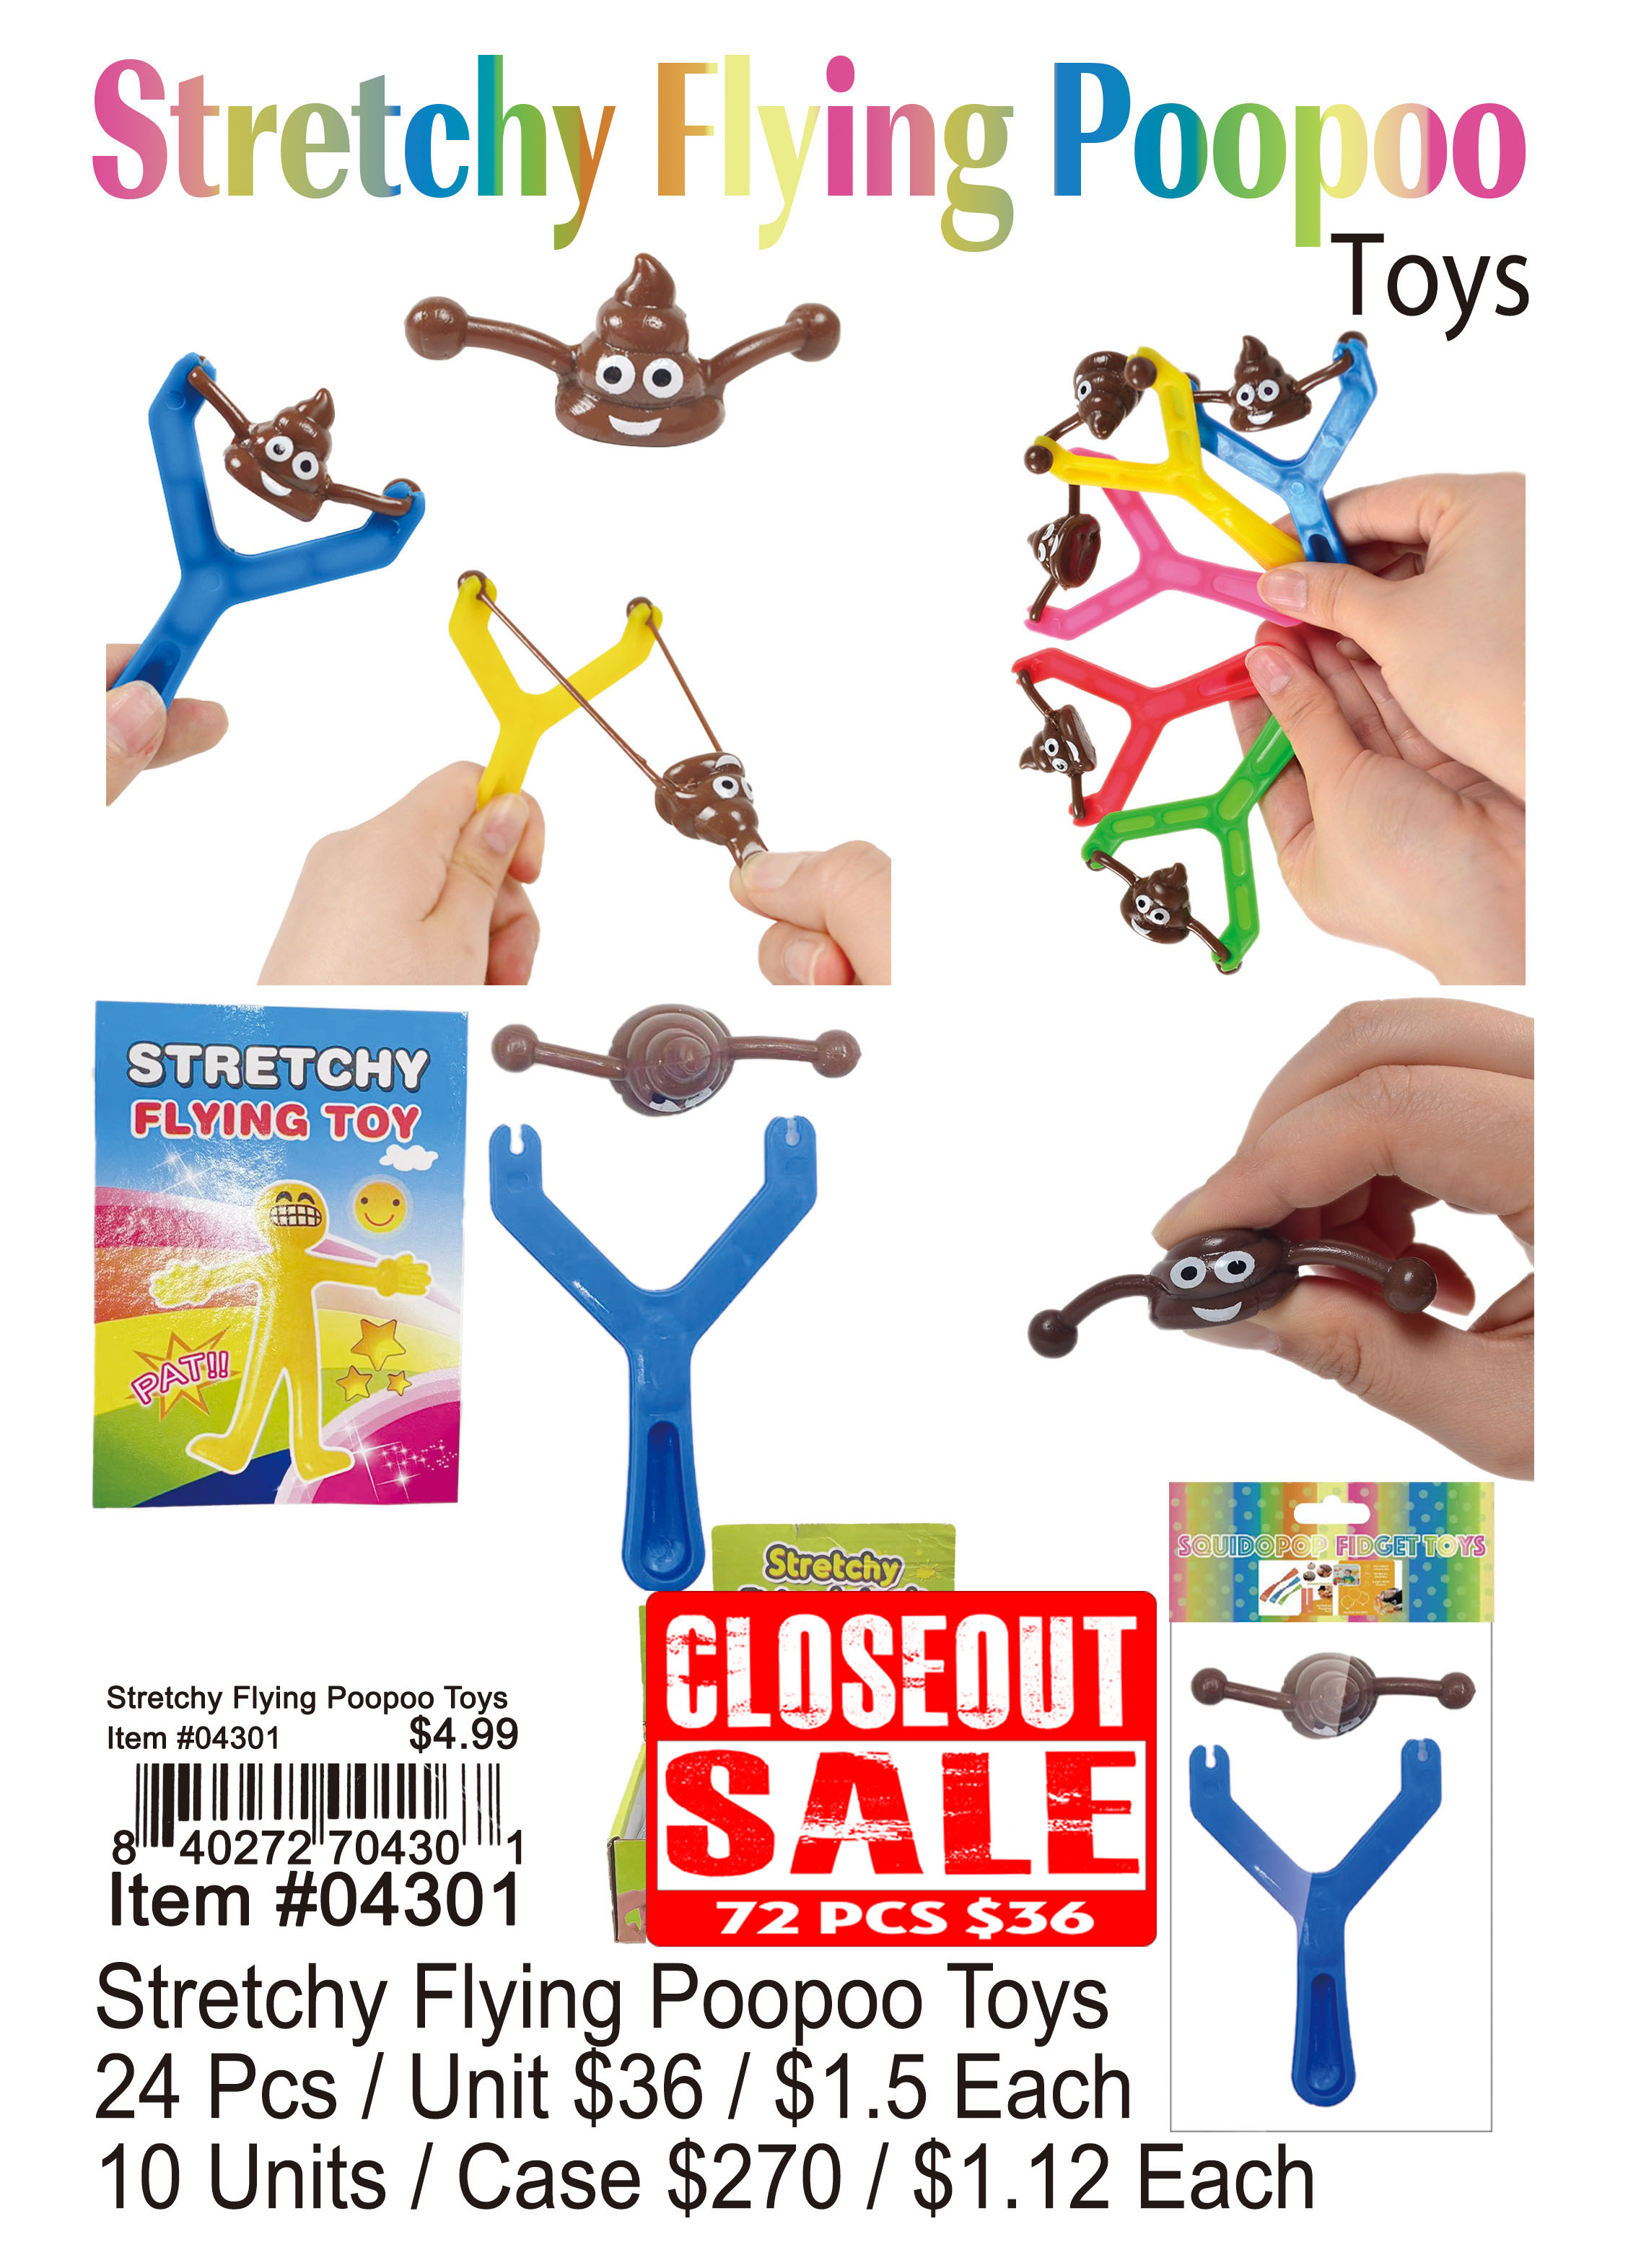 Stretchy Flying Poopoo Toys (CL)